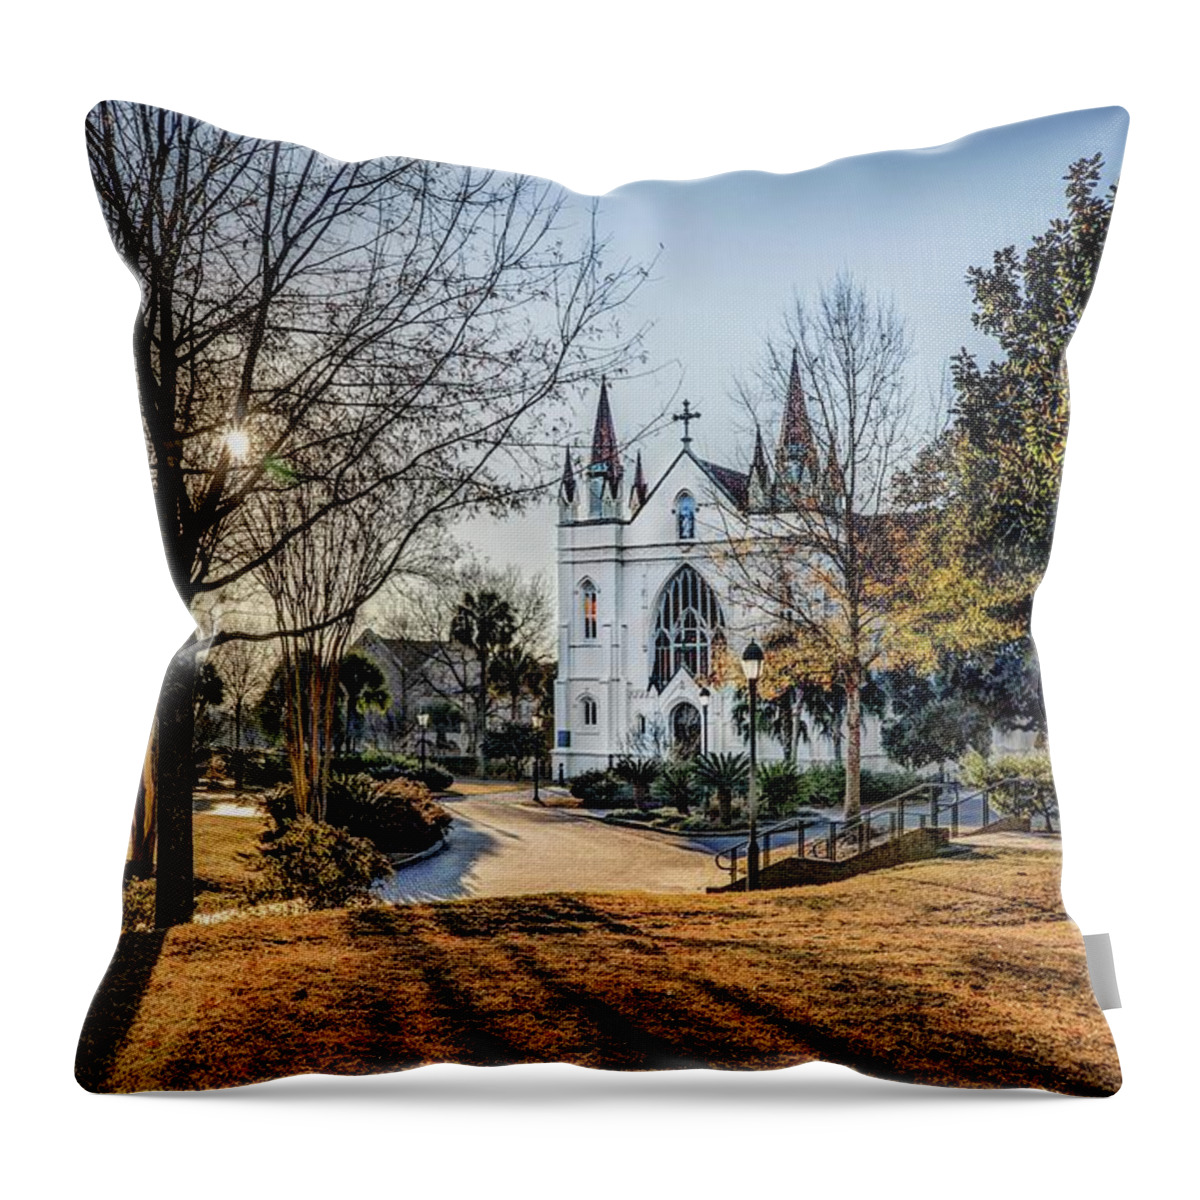 Alabama Throw Pillow featuring the photograph Springhill College Mobile Alabama by Michael Thomas